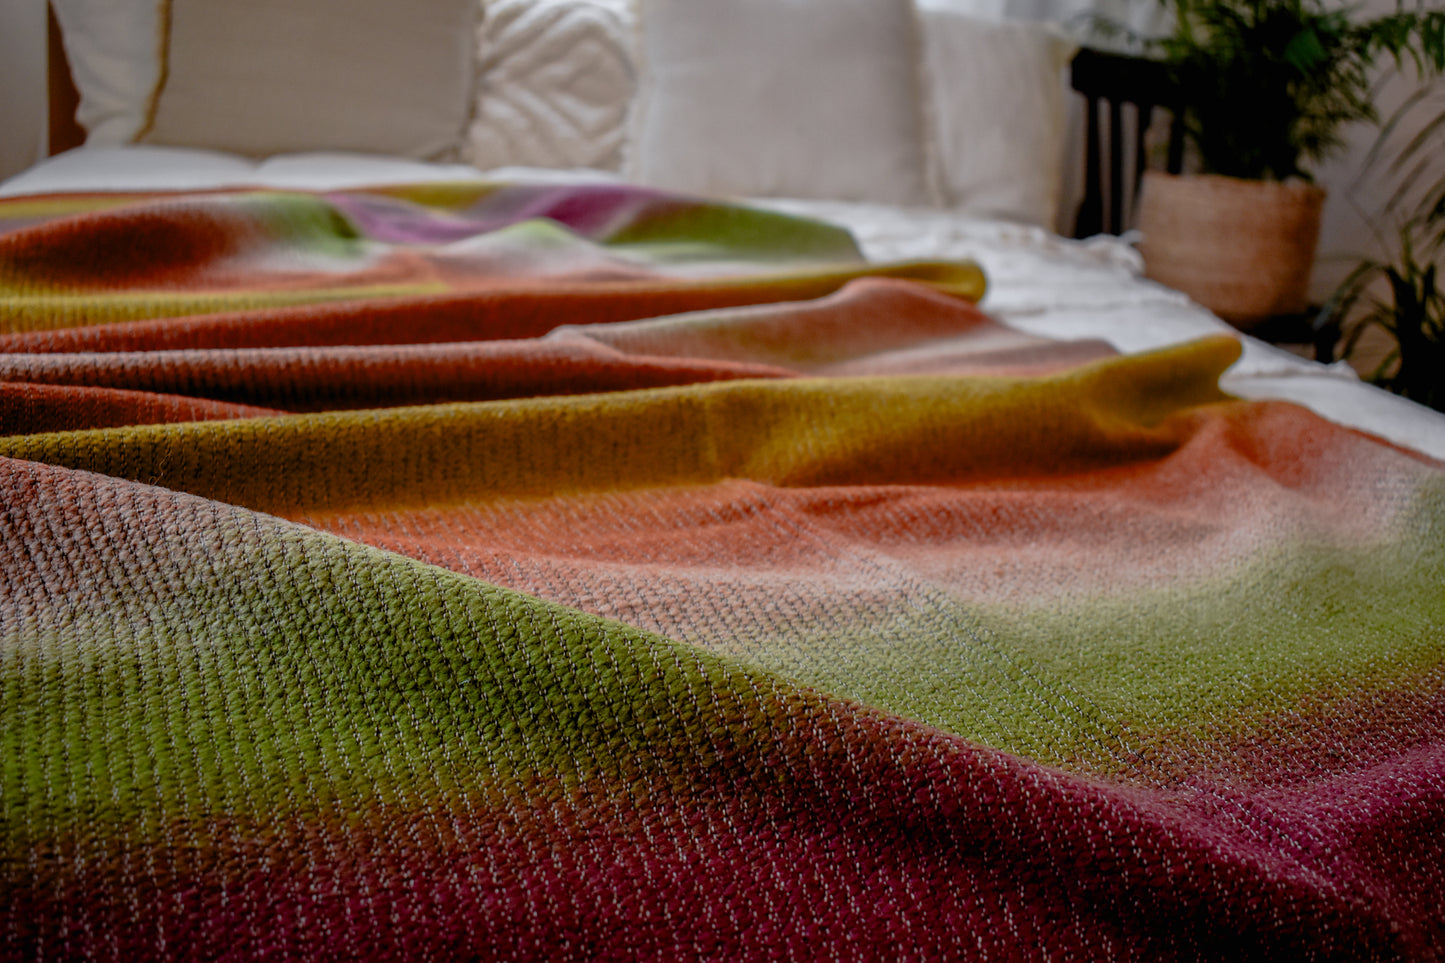 Hand-woven wool blanket / plaid in autumn colors (BATE 10)